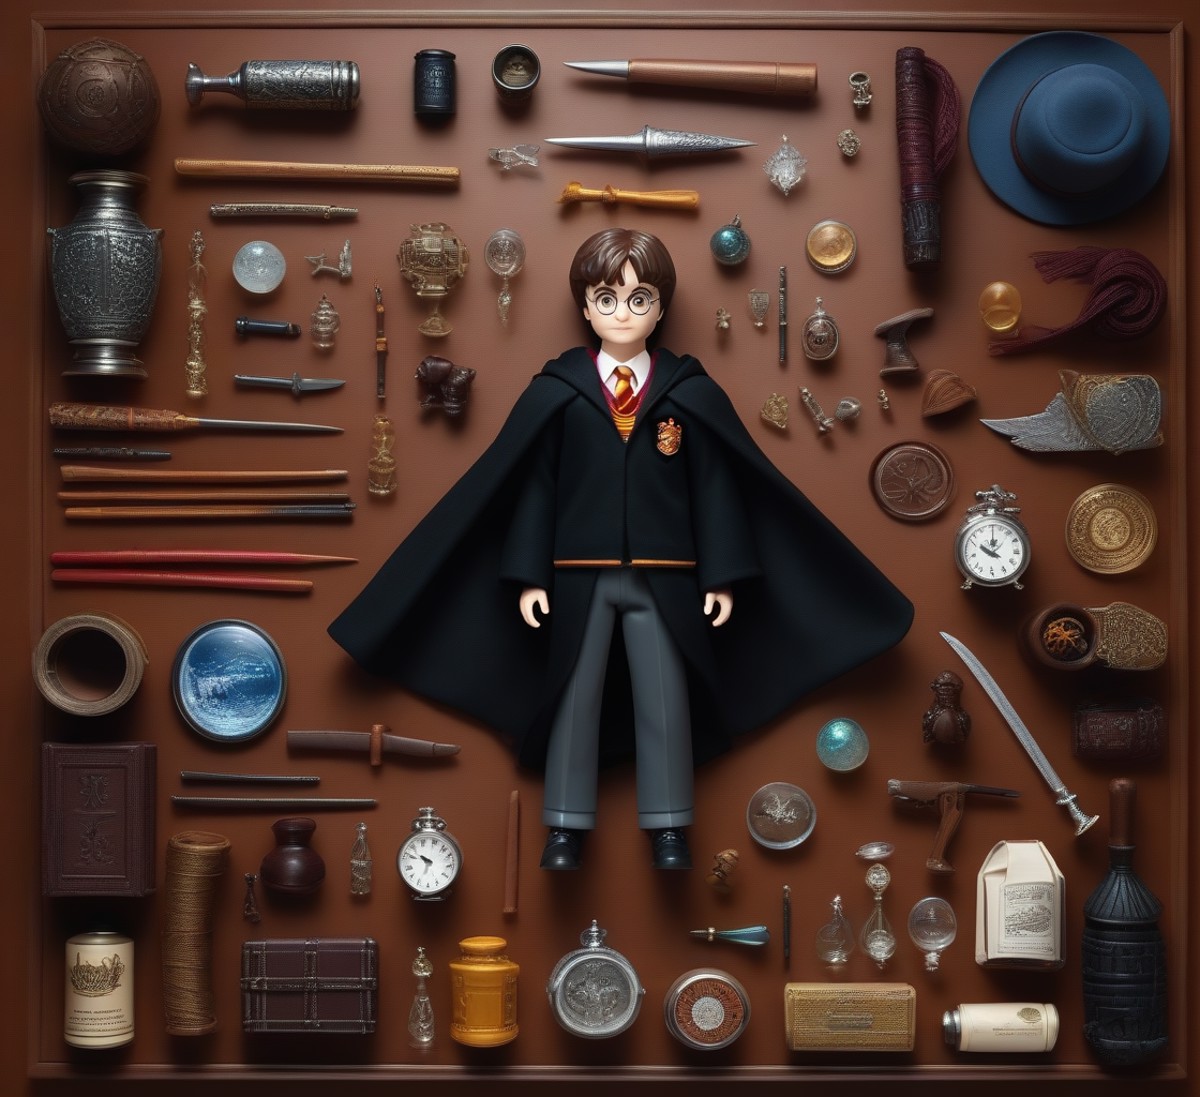 knolling, Things and Objects, Harry Potter figurine doll, lots of details and additions, assembled character in the center...